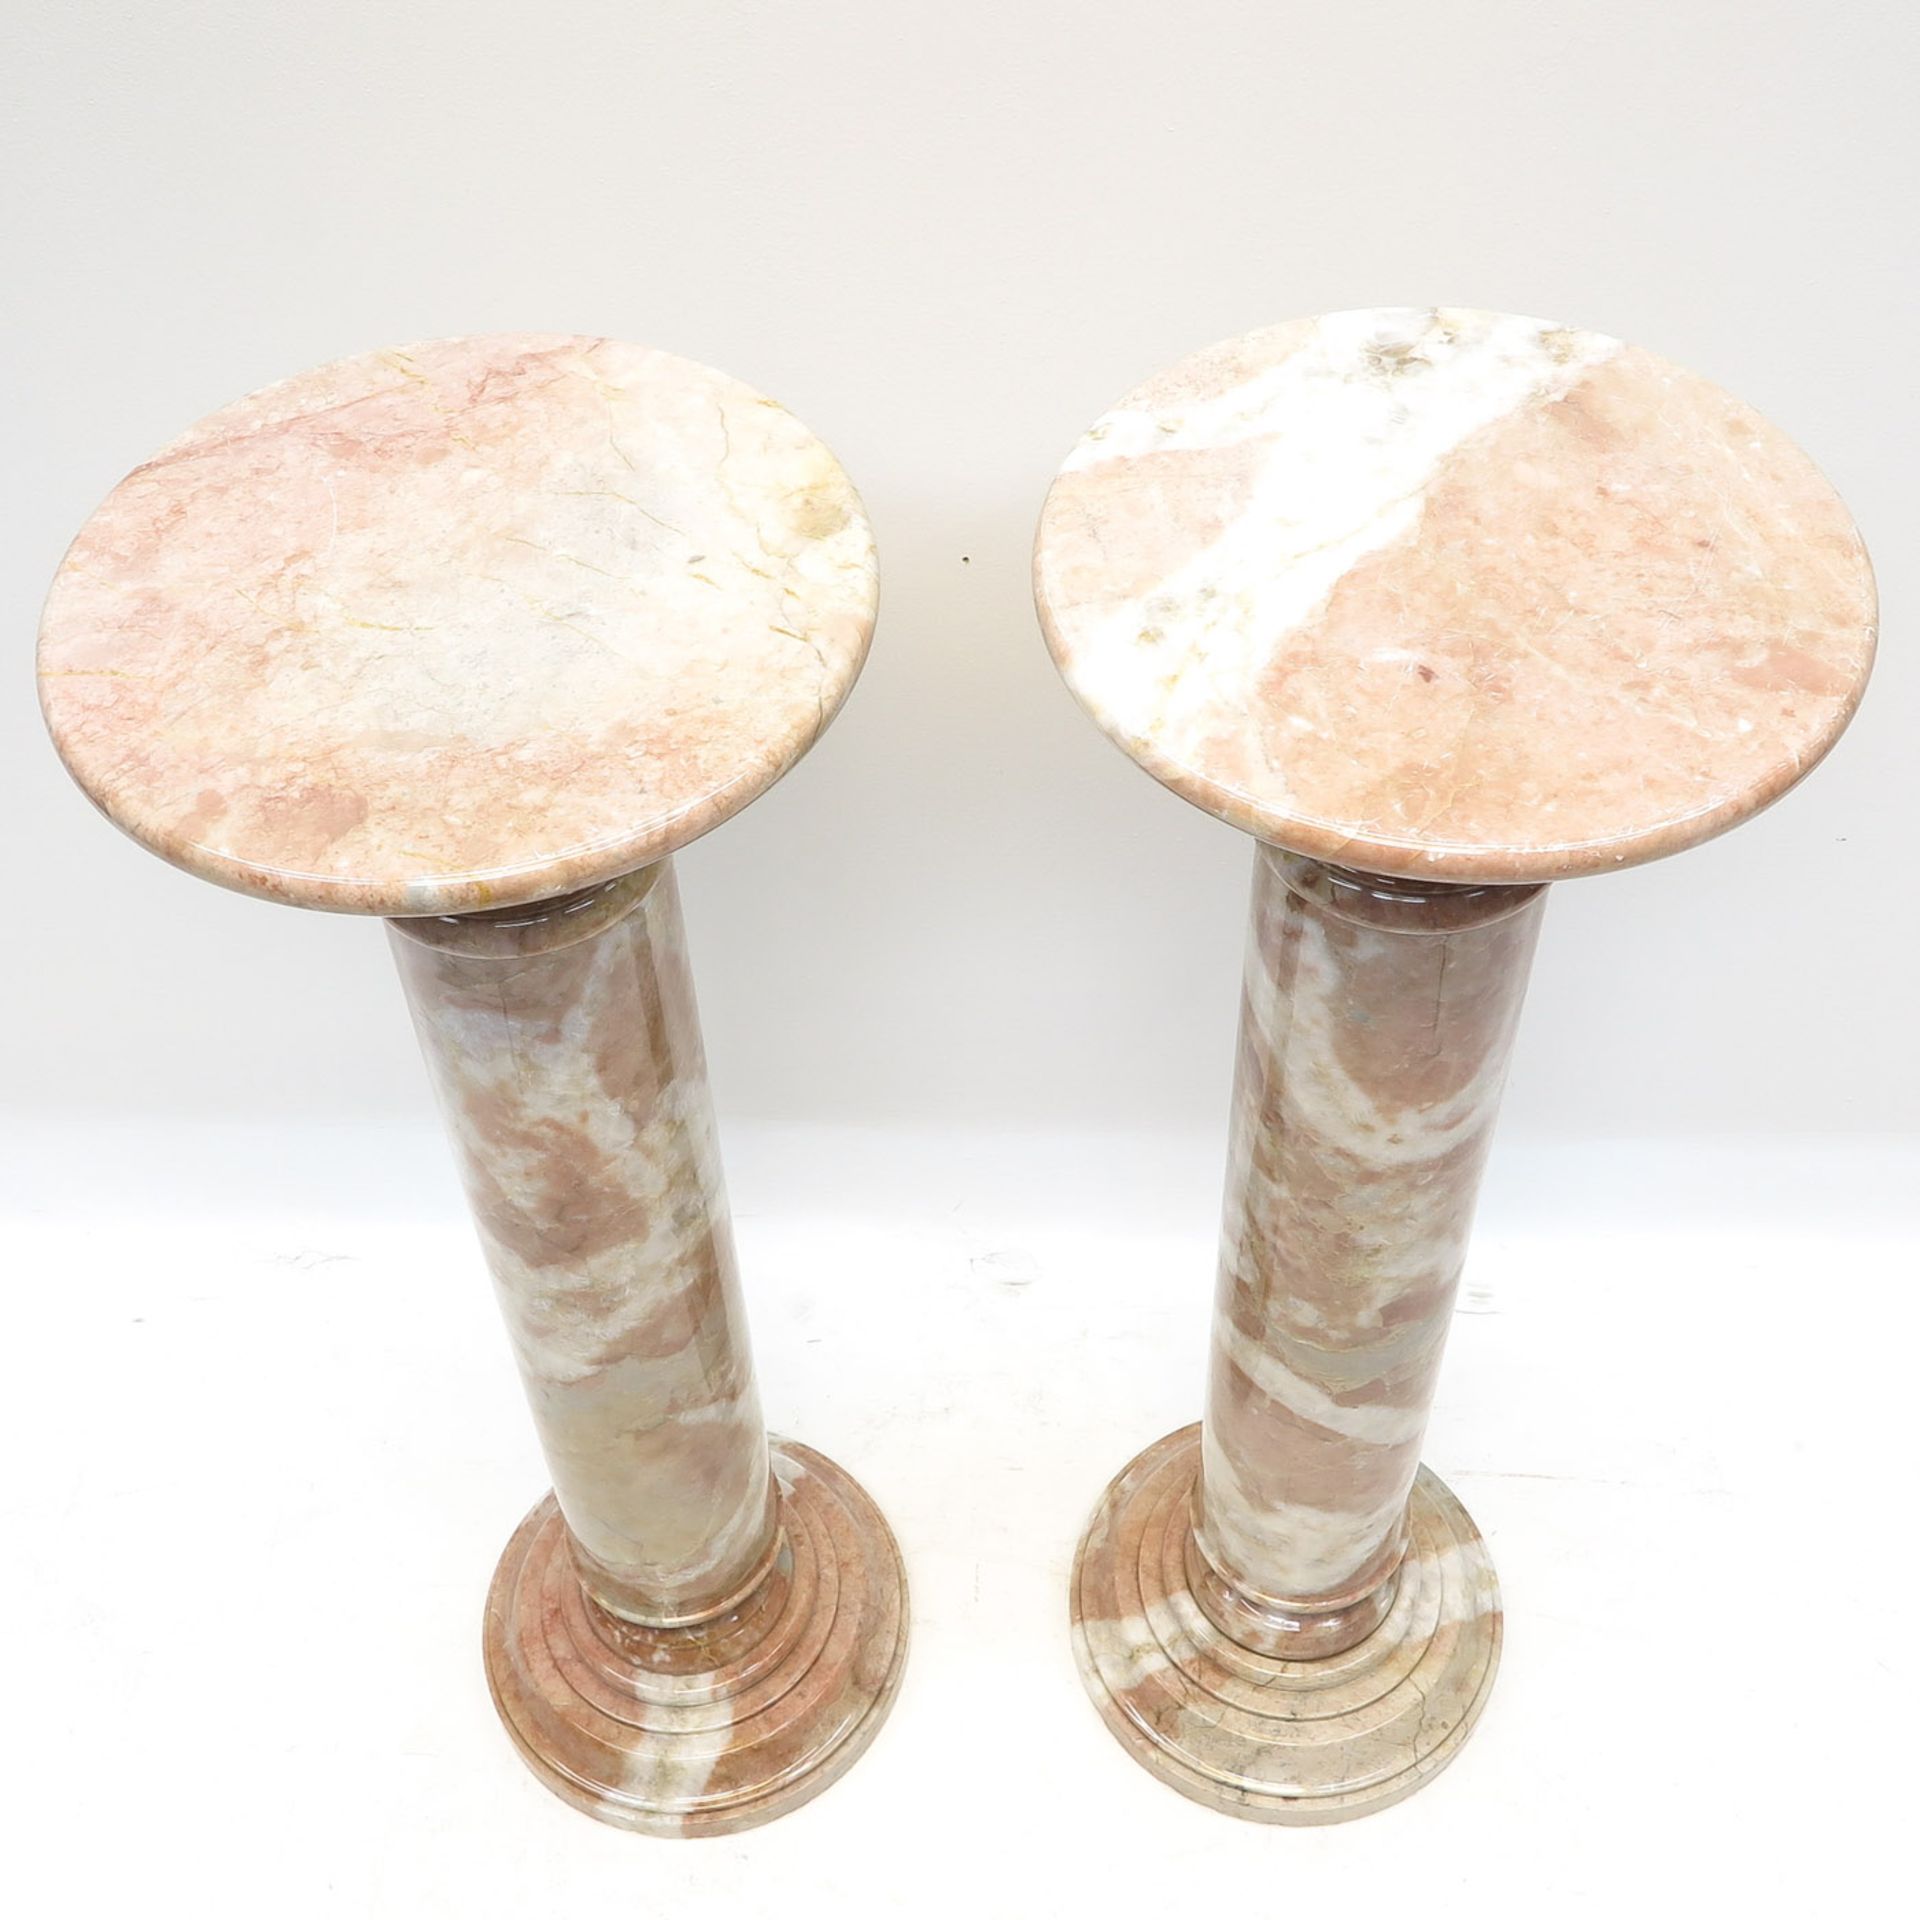 A Pair of Marble Pedestals - Image 5 of 7